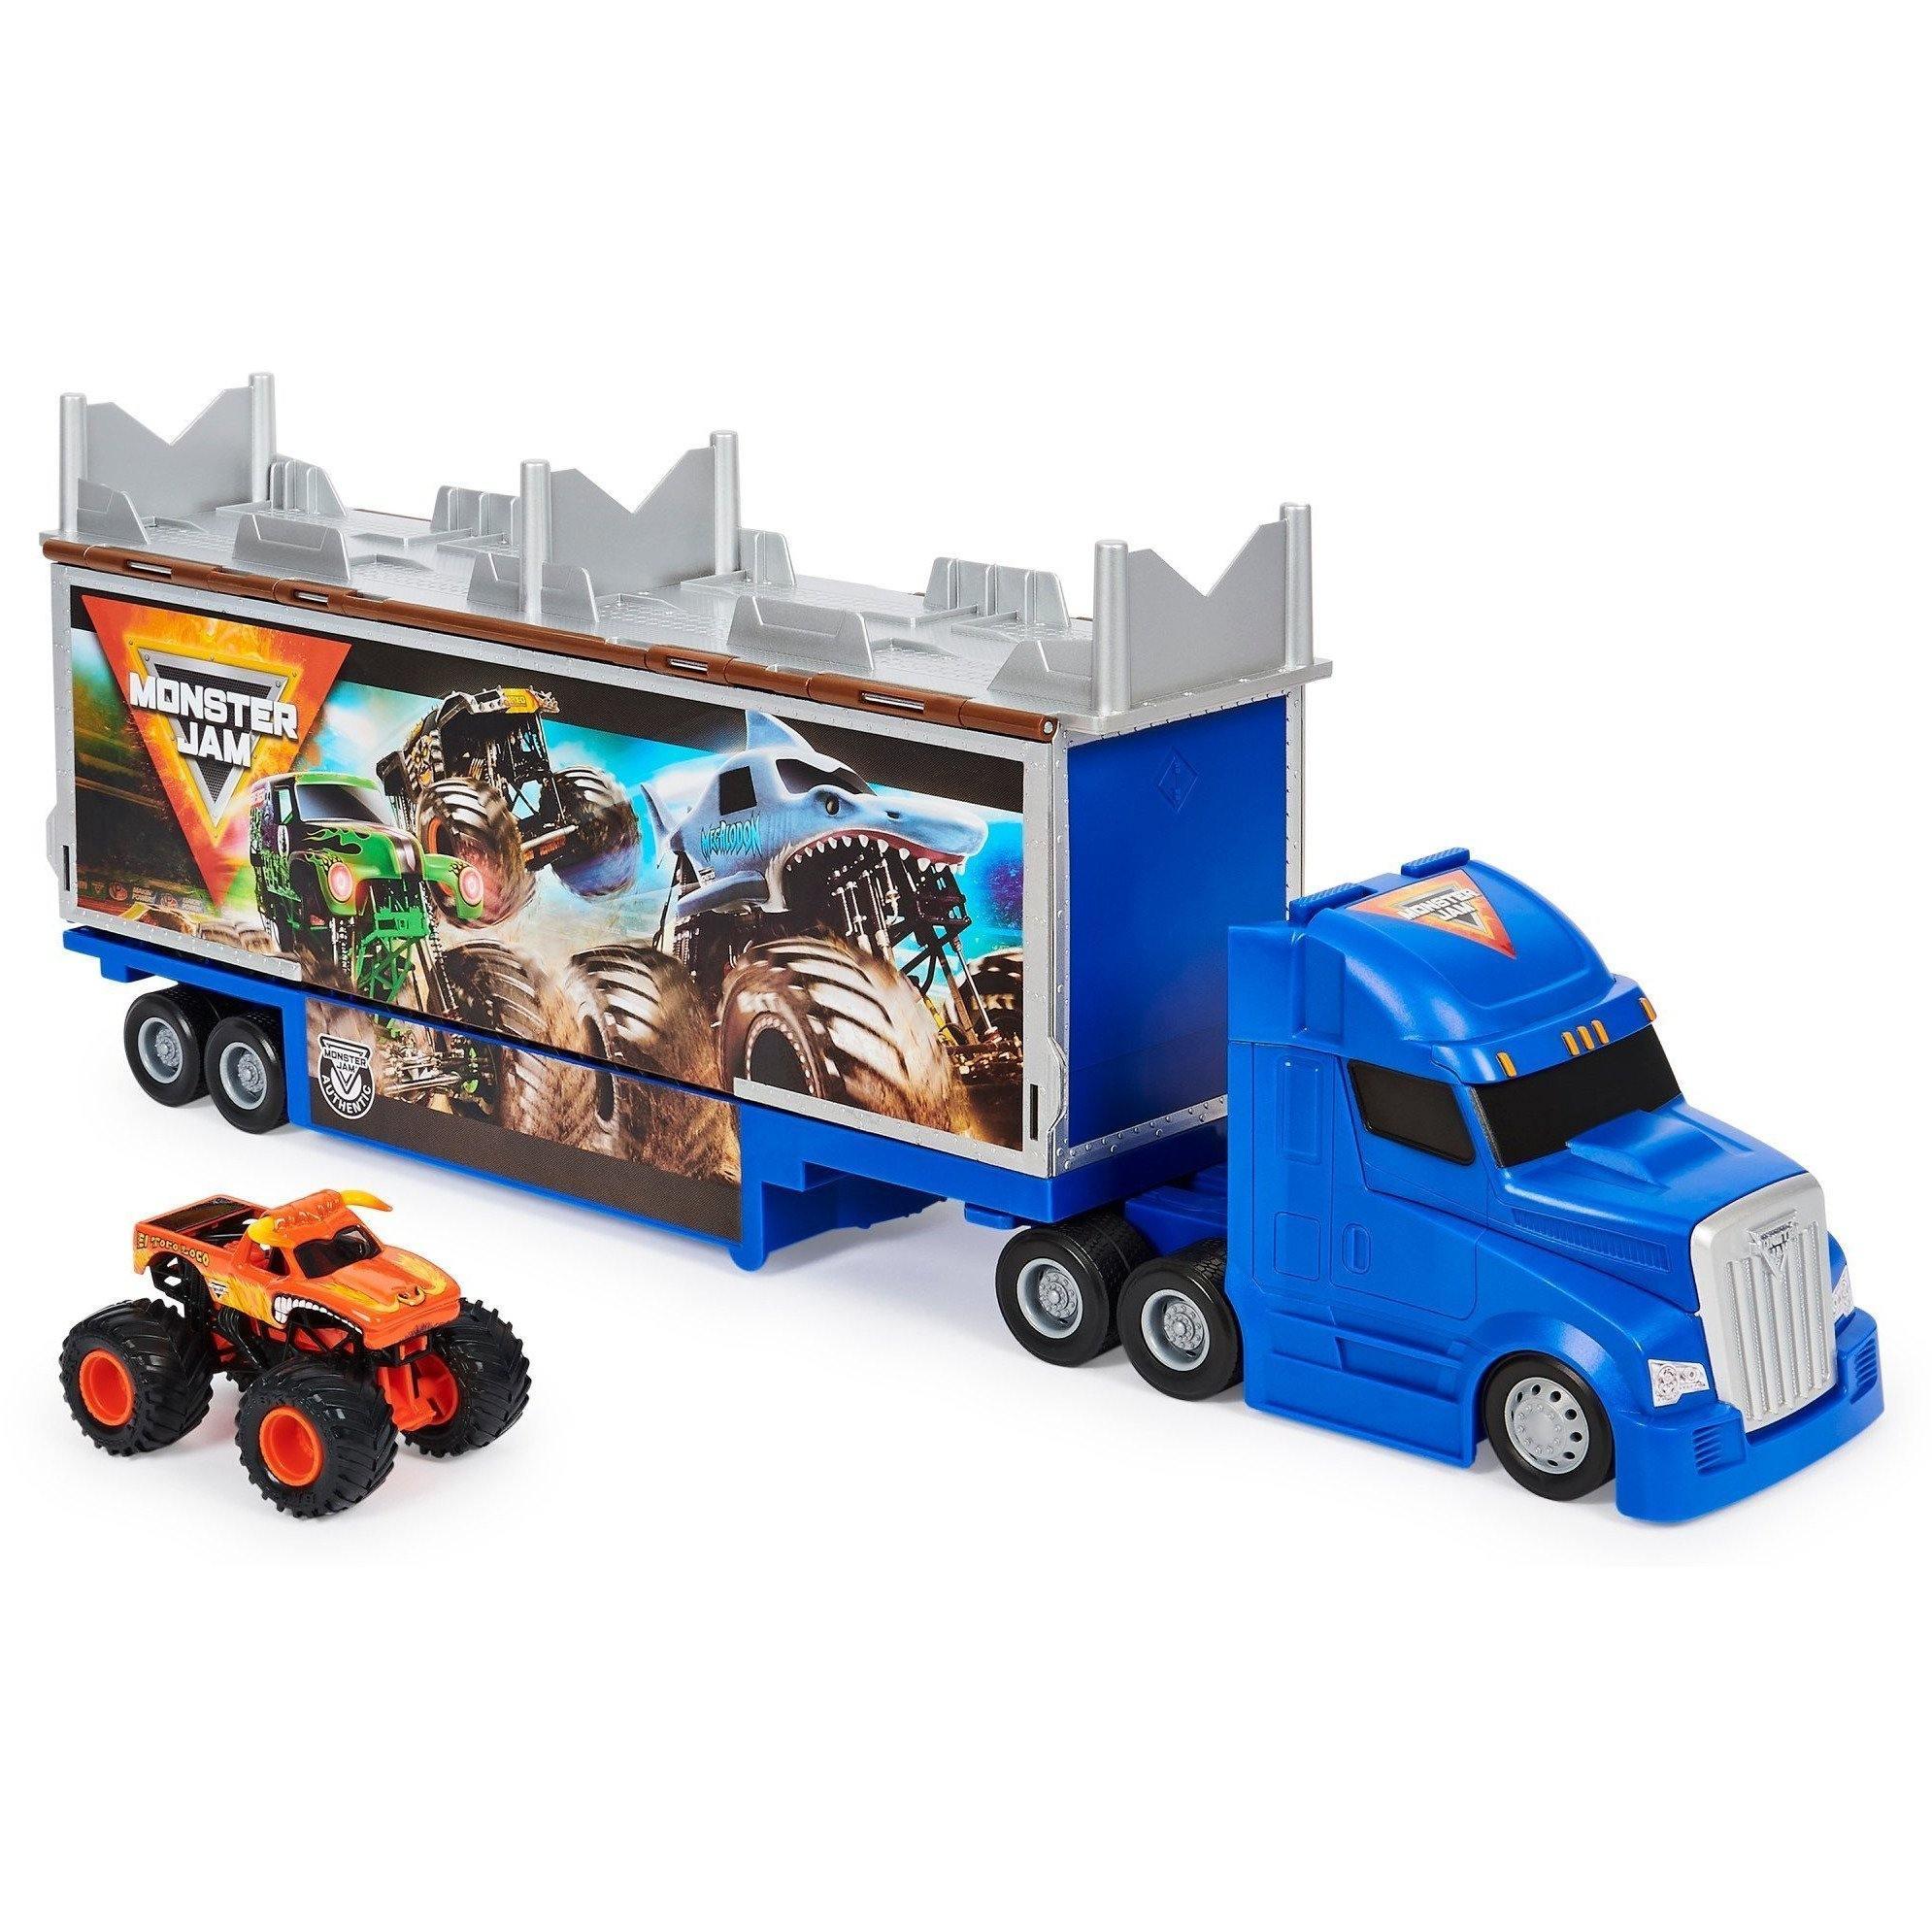 Spin Master Monster Jam 2 In 1 Transforming Hauler Playset - BumbleToys - 5-7 Years, Arabic Triangle Trading, Boys, Monster Jam, Moster Jam, Vehicles & Play Sets